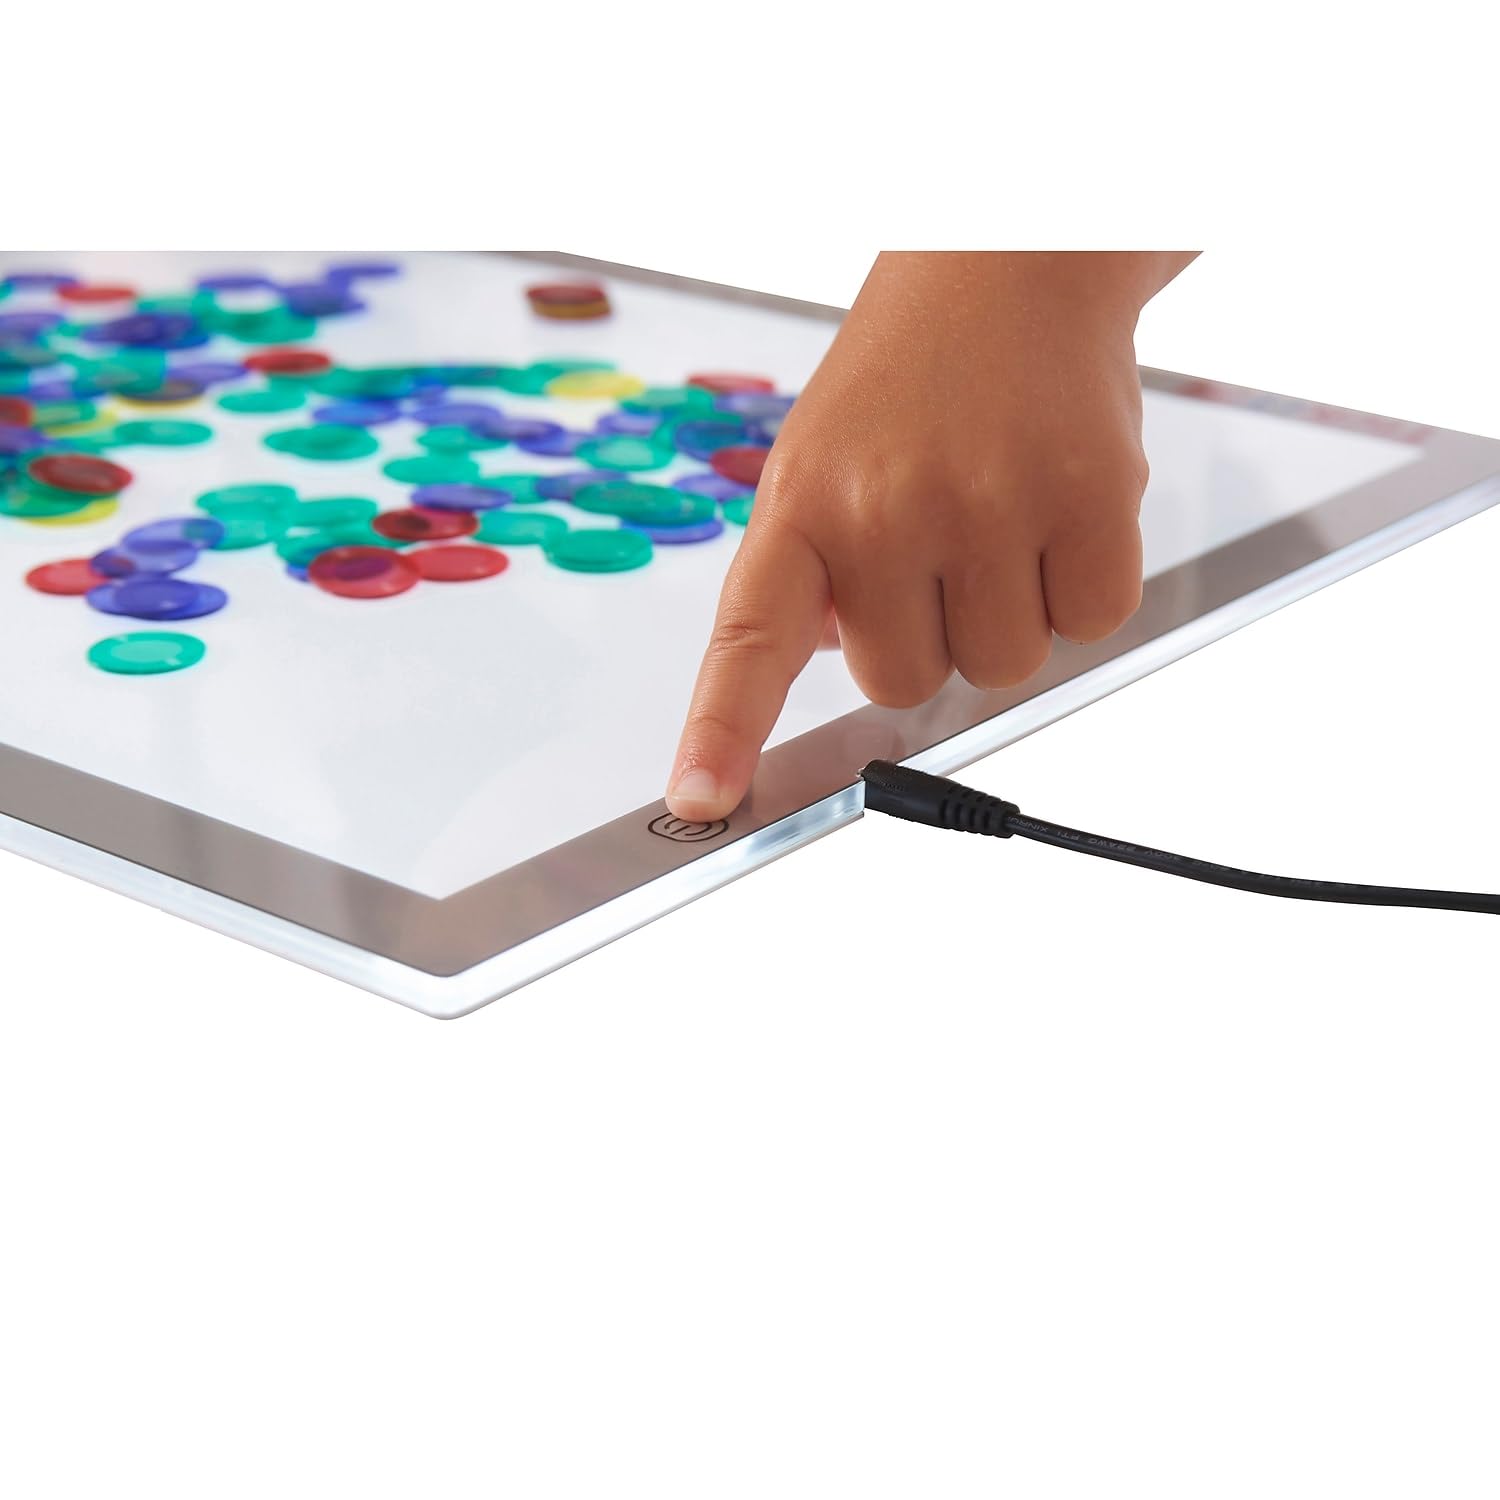 TickiT Ultra Bright LED Light Panel - In Home Learning Supplies for Sensory Play - Adjustable Brightness - Color and Shape Exploration on a Light Box